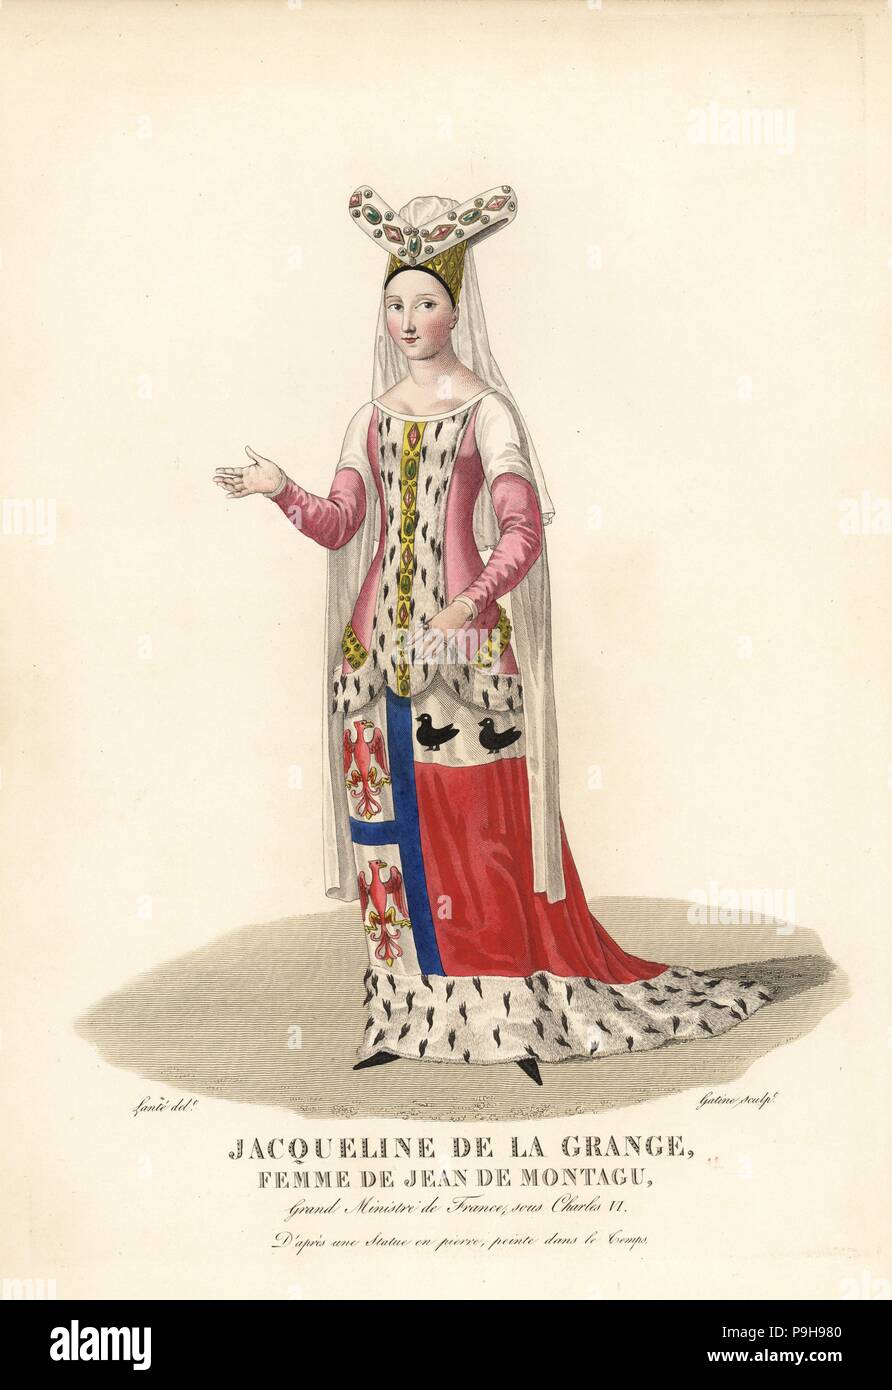 Jacqueline de la Grange, wife of Jean de Montagu, Grand Minister of France  under Charles VI. She wears an escoffion hat with veil, and an armorial robe  decorated with the coats of